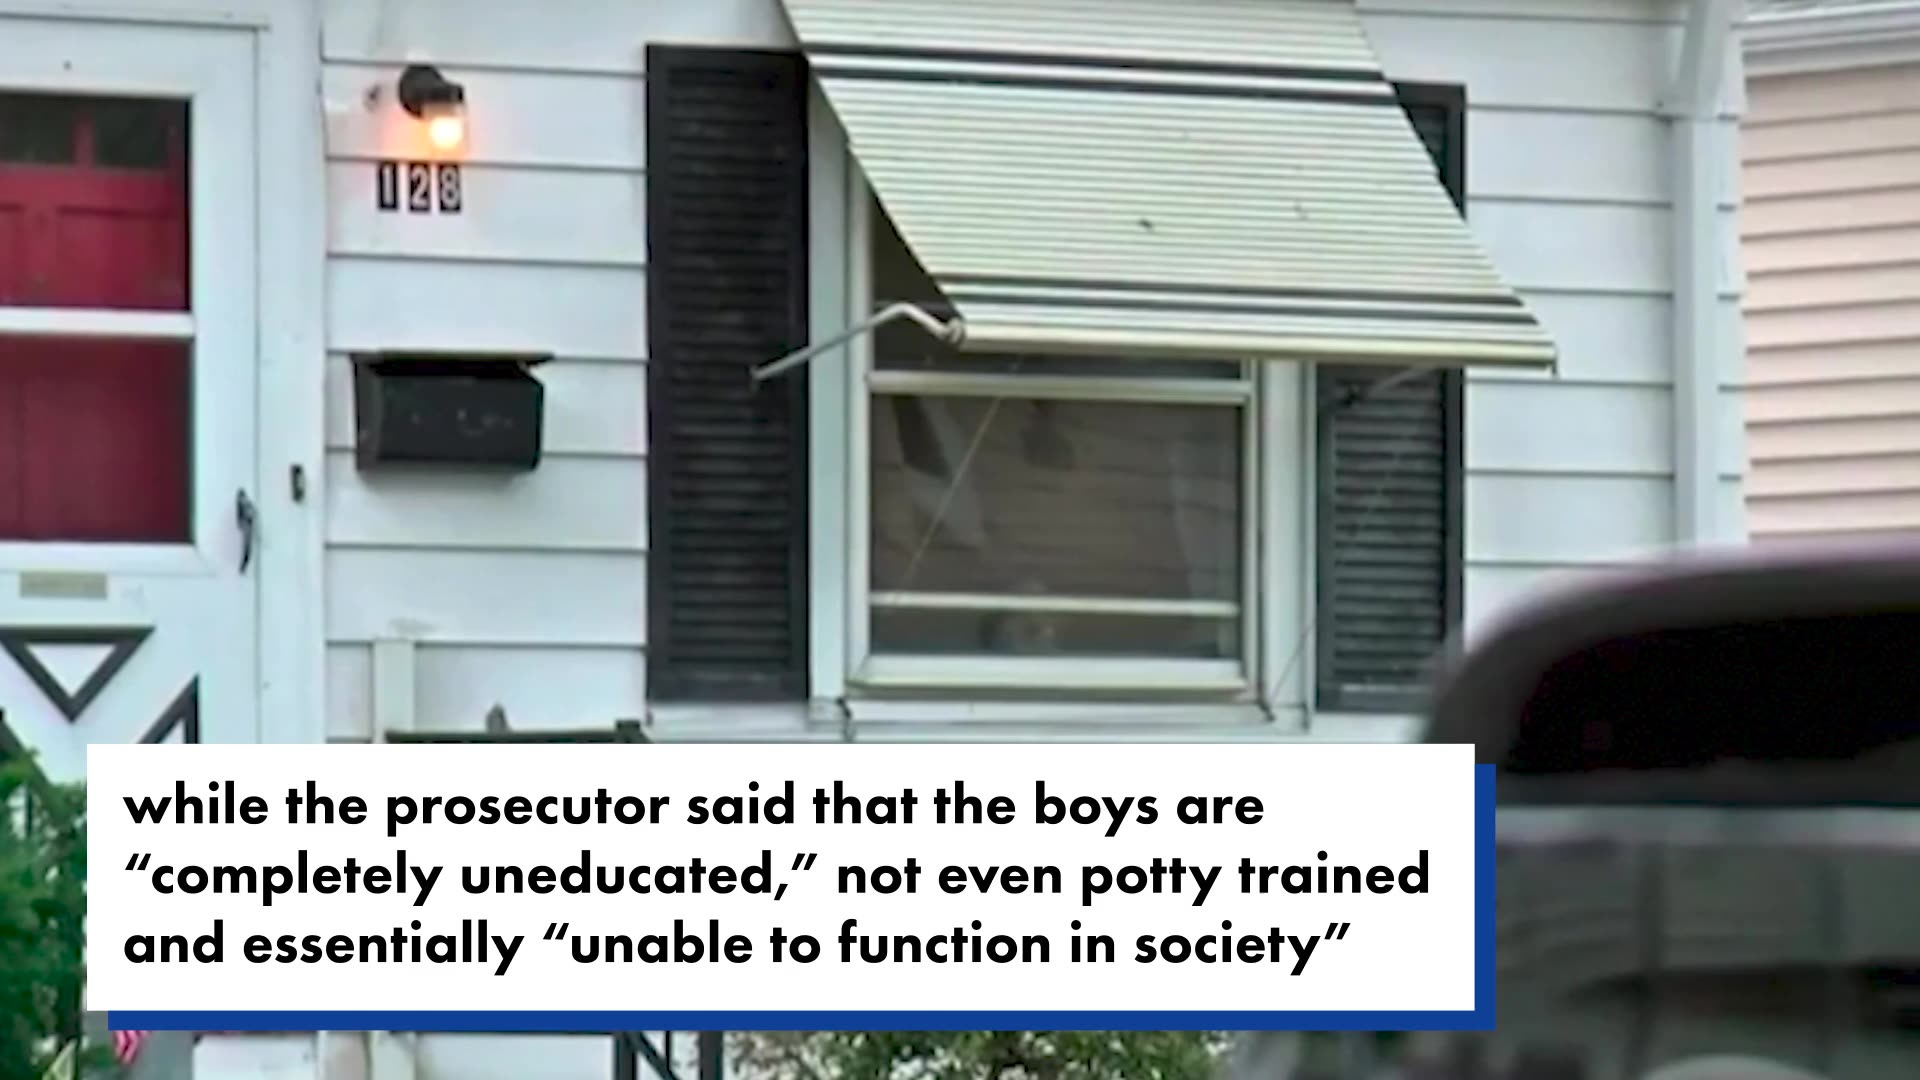 Like a 'horror movie': Naked boys who escaped feces-covered home looked like 'cavemen' who'd 'never seen the sun before': affidavit"